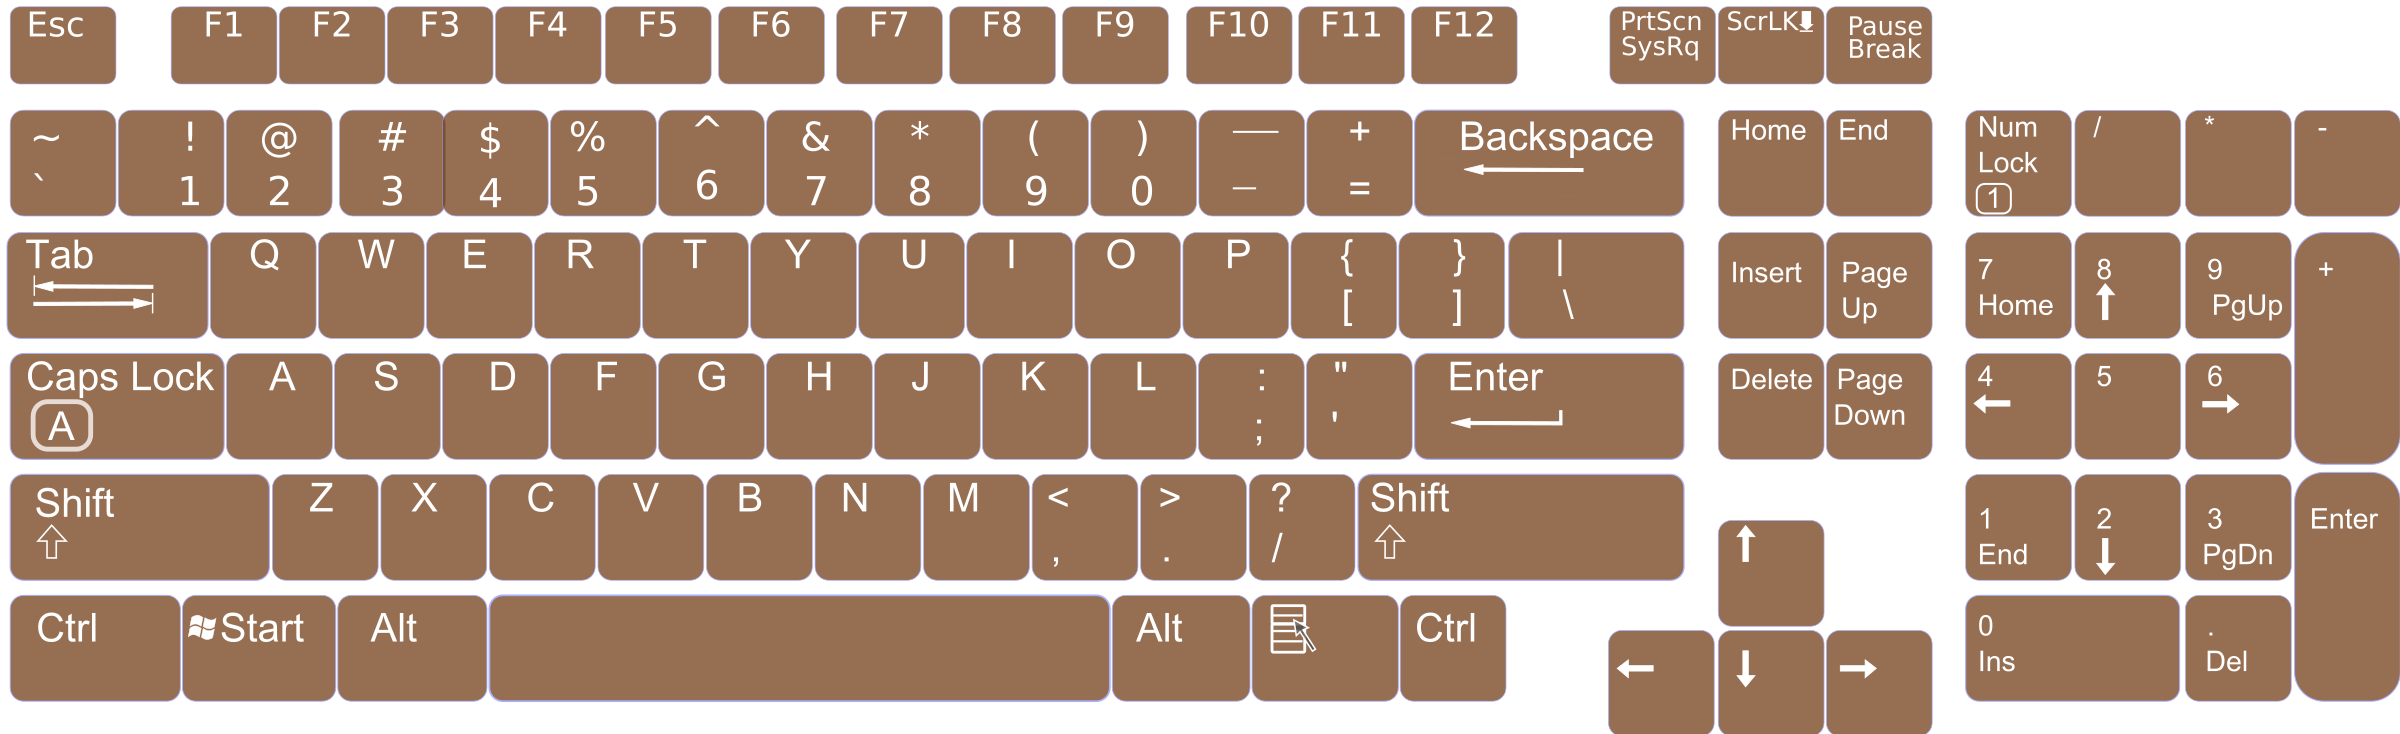 Standard Q W E R T Y Keyboard Layout PNG image